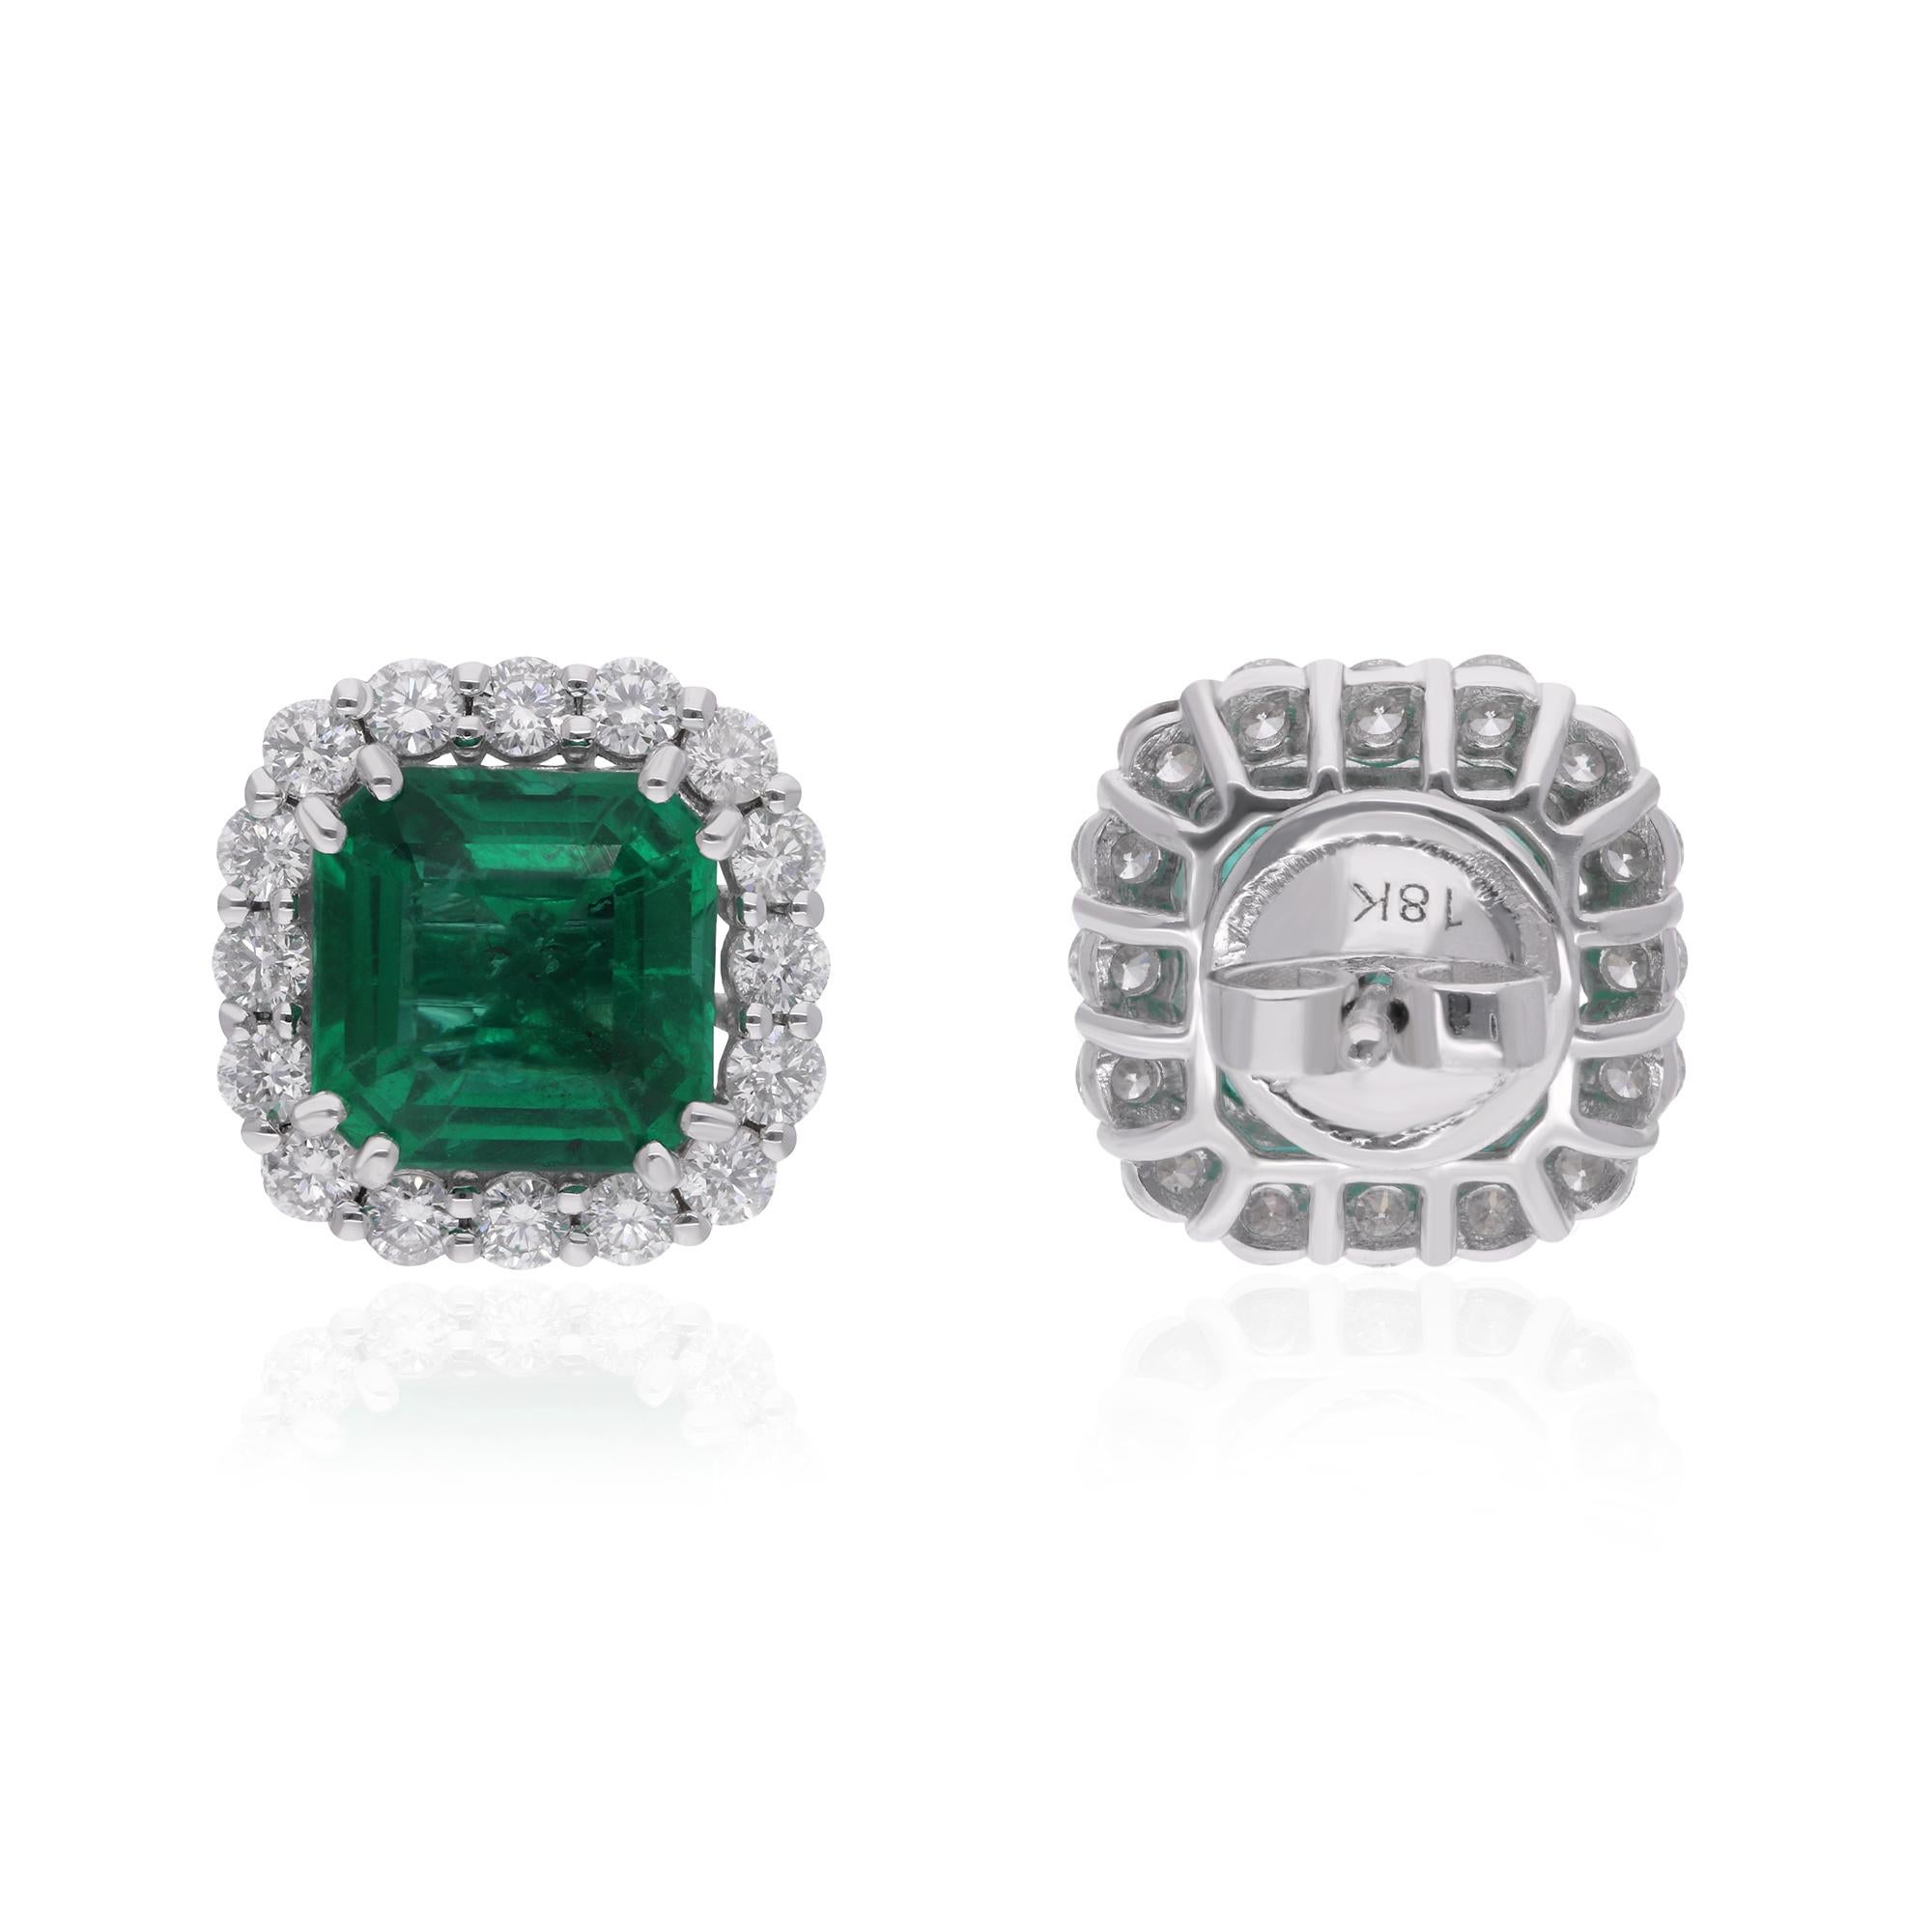 Immerse yourself in the timeless allure of these exquisite Zambian Emerald Gemstone Stud Earrings, adorned with dazzling diamonds and meticulously crafted in 14 karat white gold. Each element of these earrings exudes sophistication and refinement,